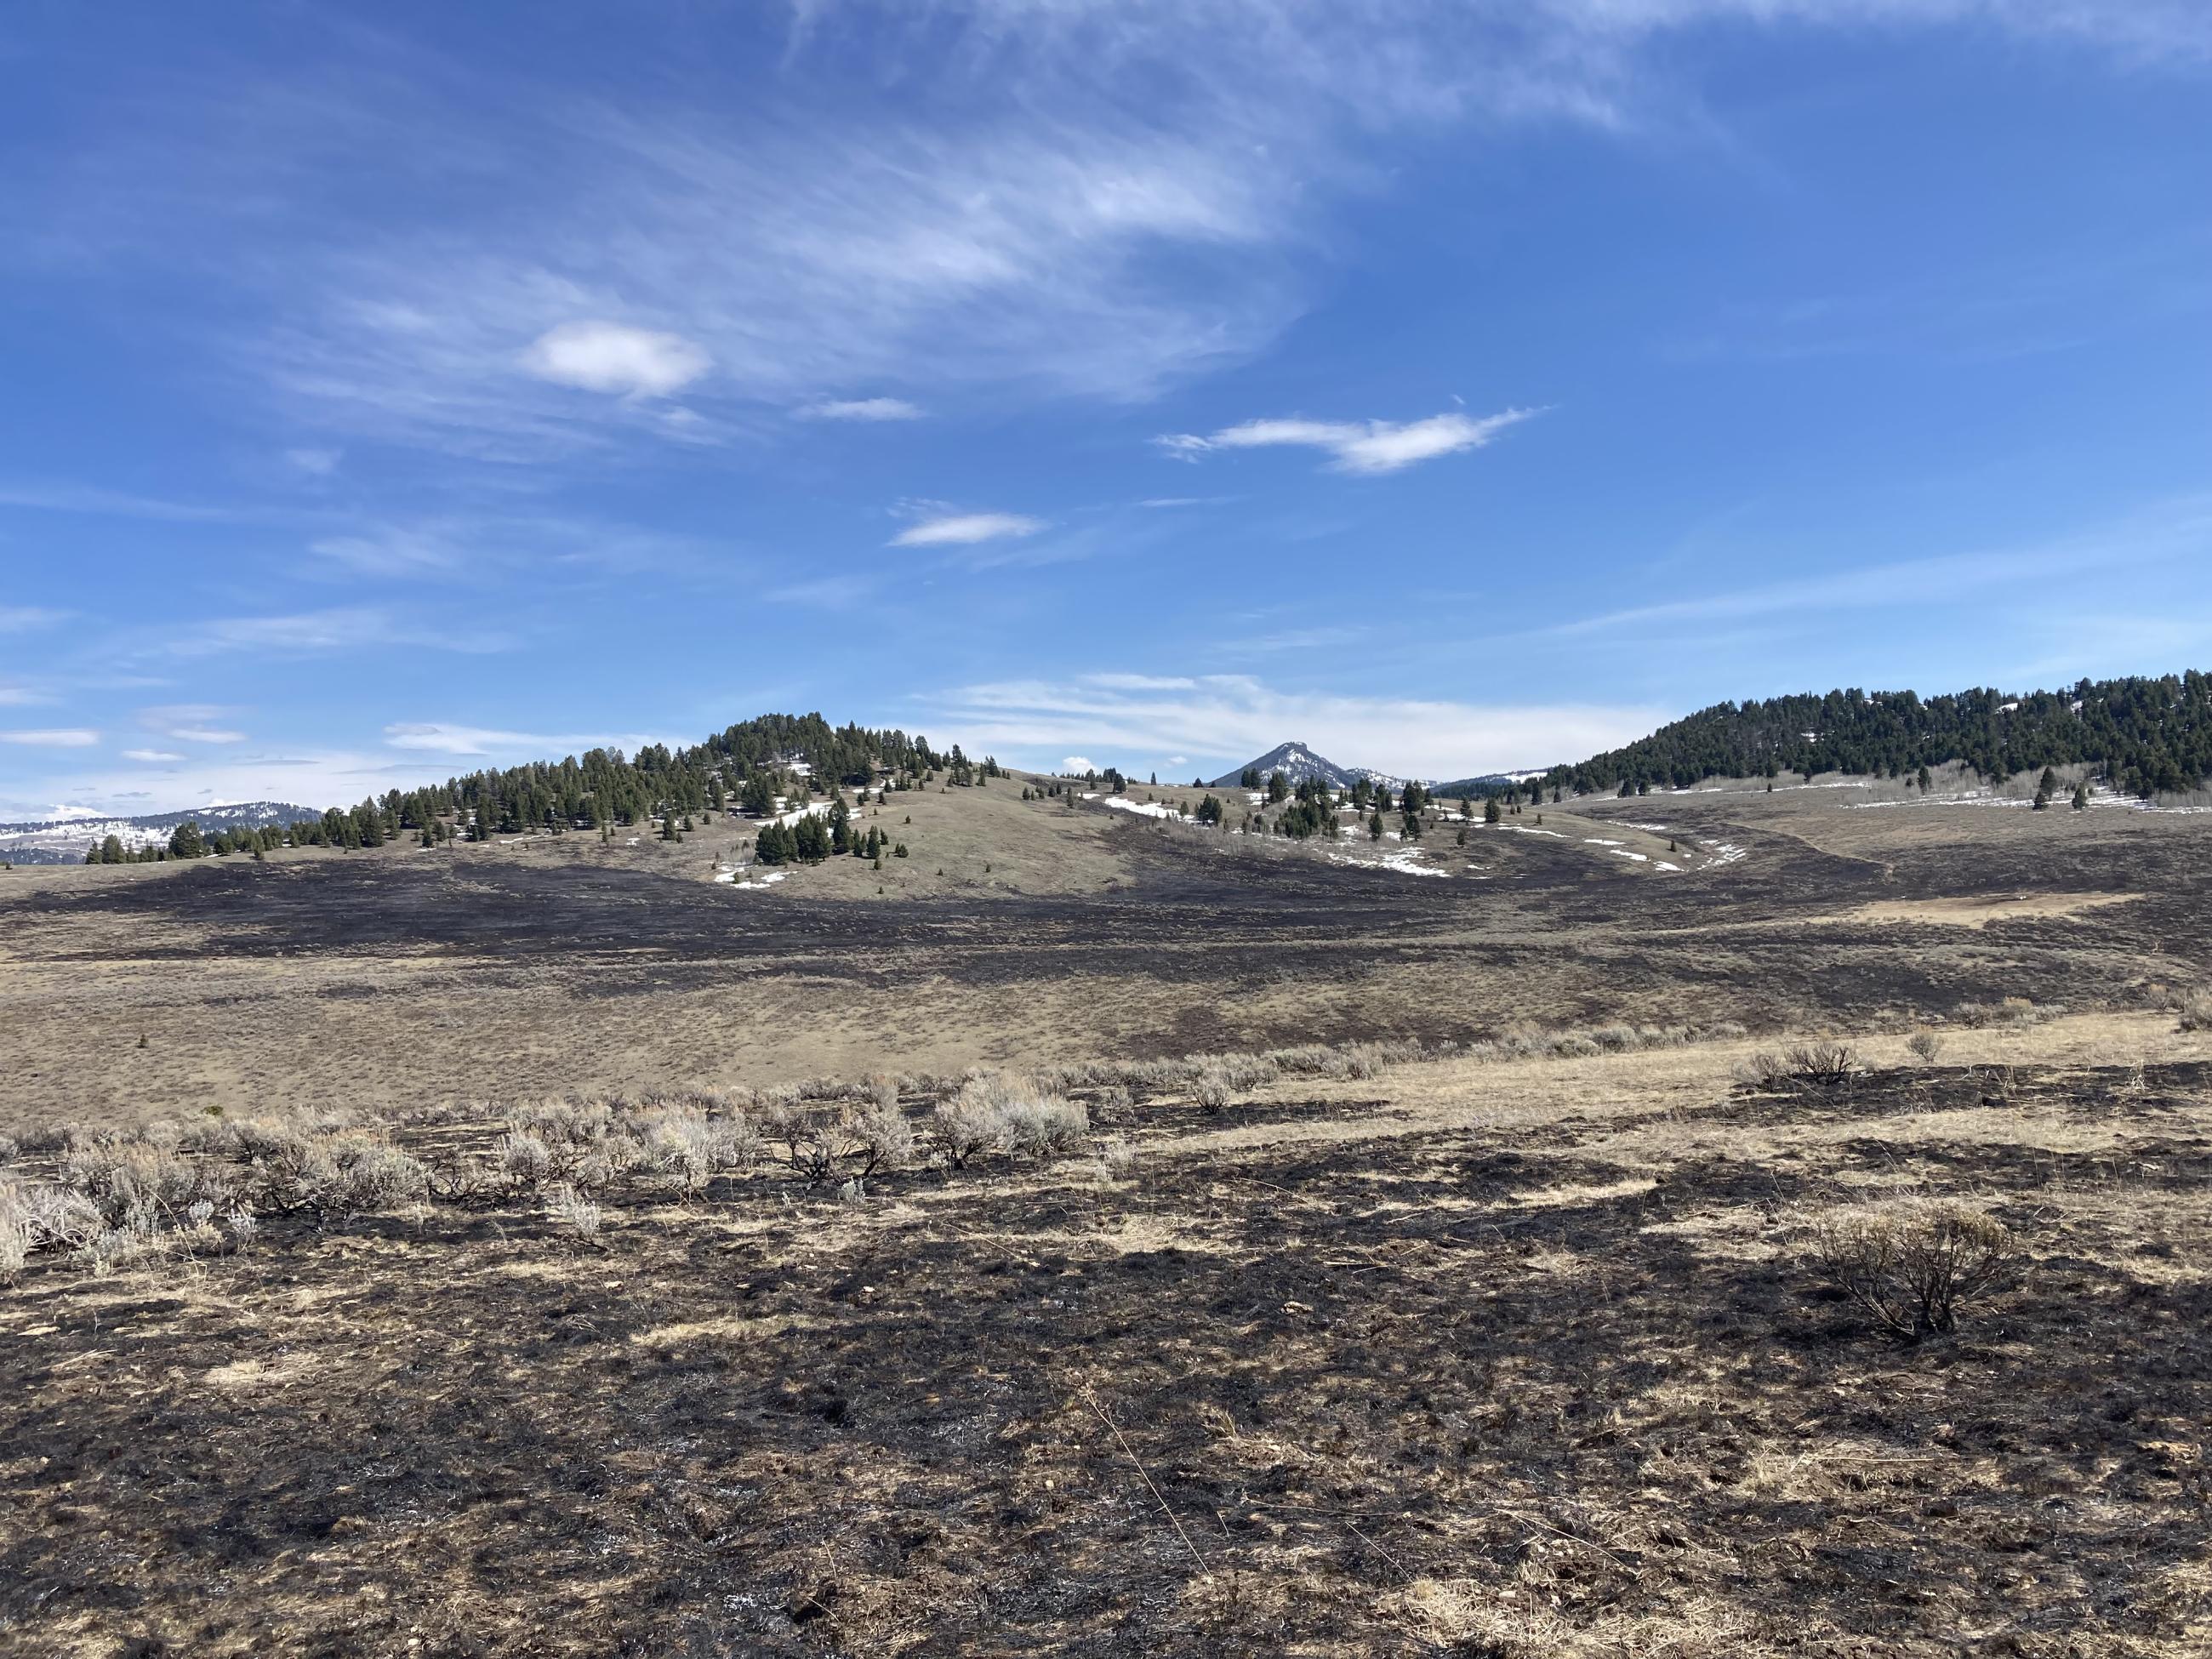 Photo showing the burn pattern, with ground fuels burned in a mosaic pattern and unburned trees.